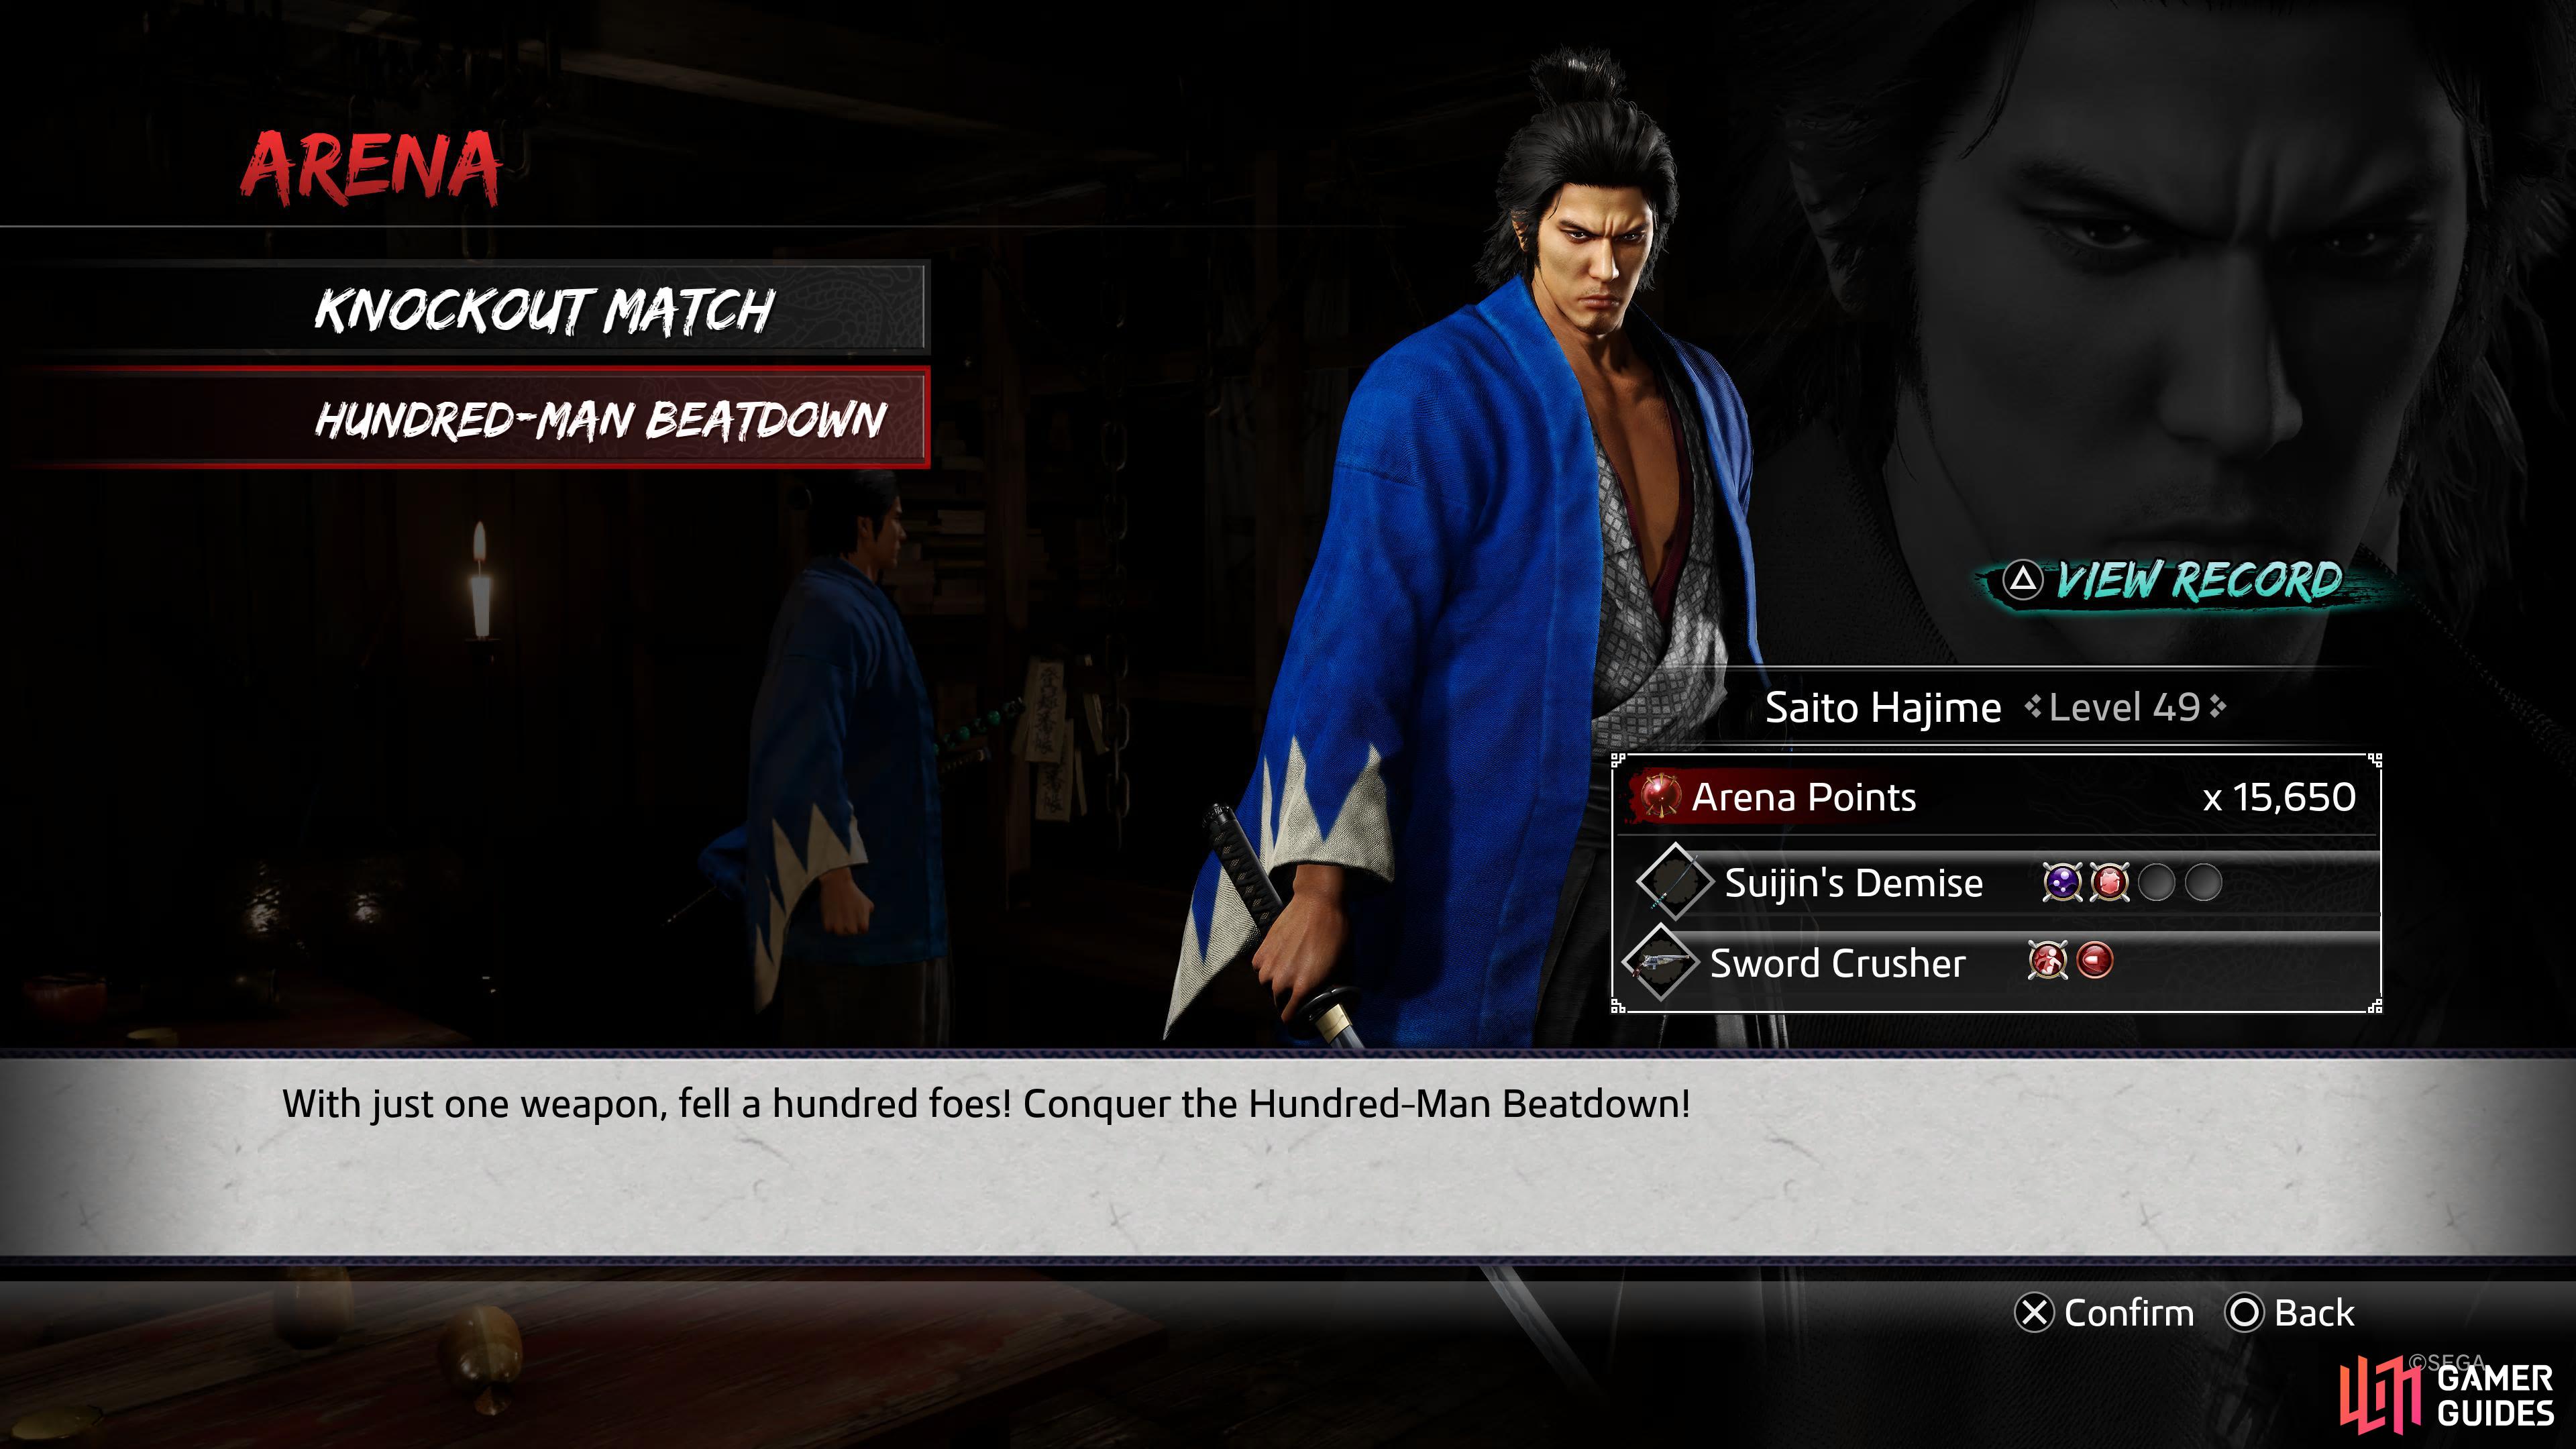 Hundred-Man Beatdown is exactly what it says on the tin. You'll choose a style where you'll need to defeat 100 men!